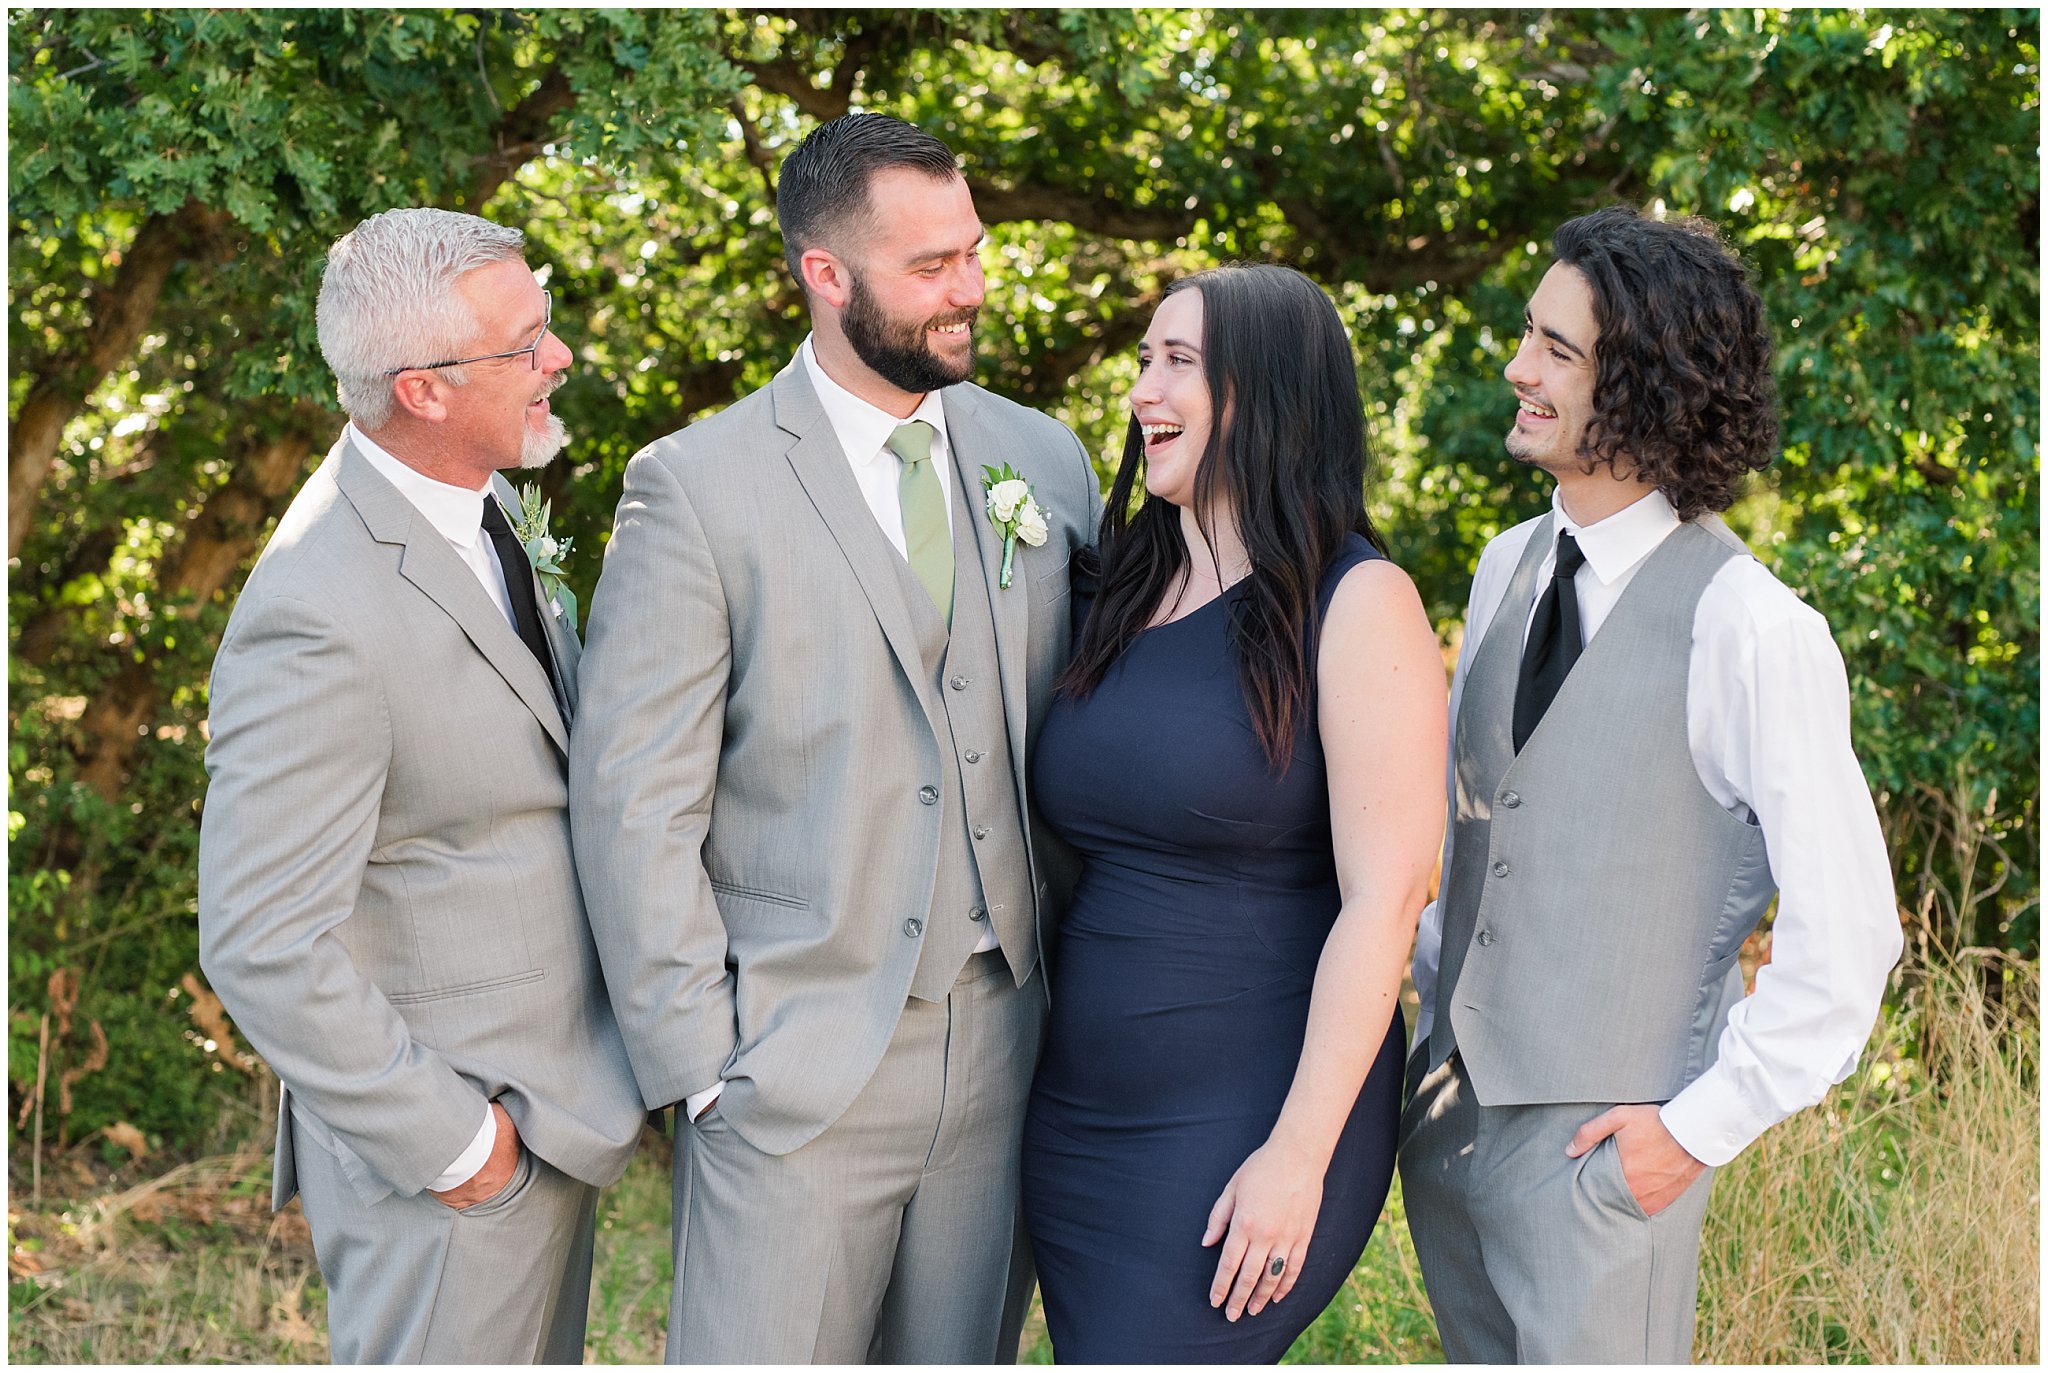 Family portraits outdoors in the woods | Sage Green and Gray Summer Wedding at Oak Hills | Jessie and Dallin Photography